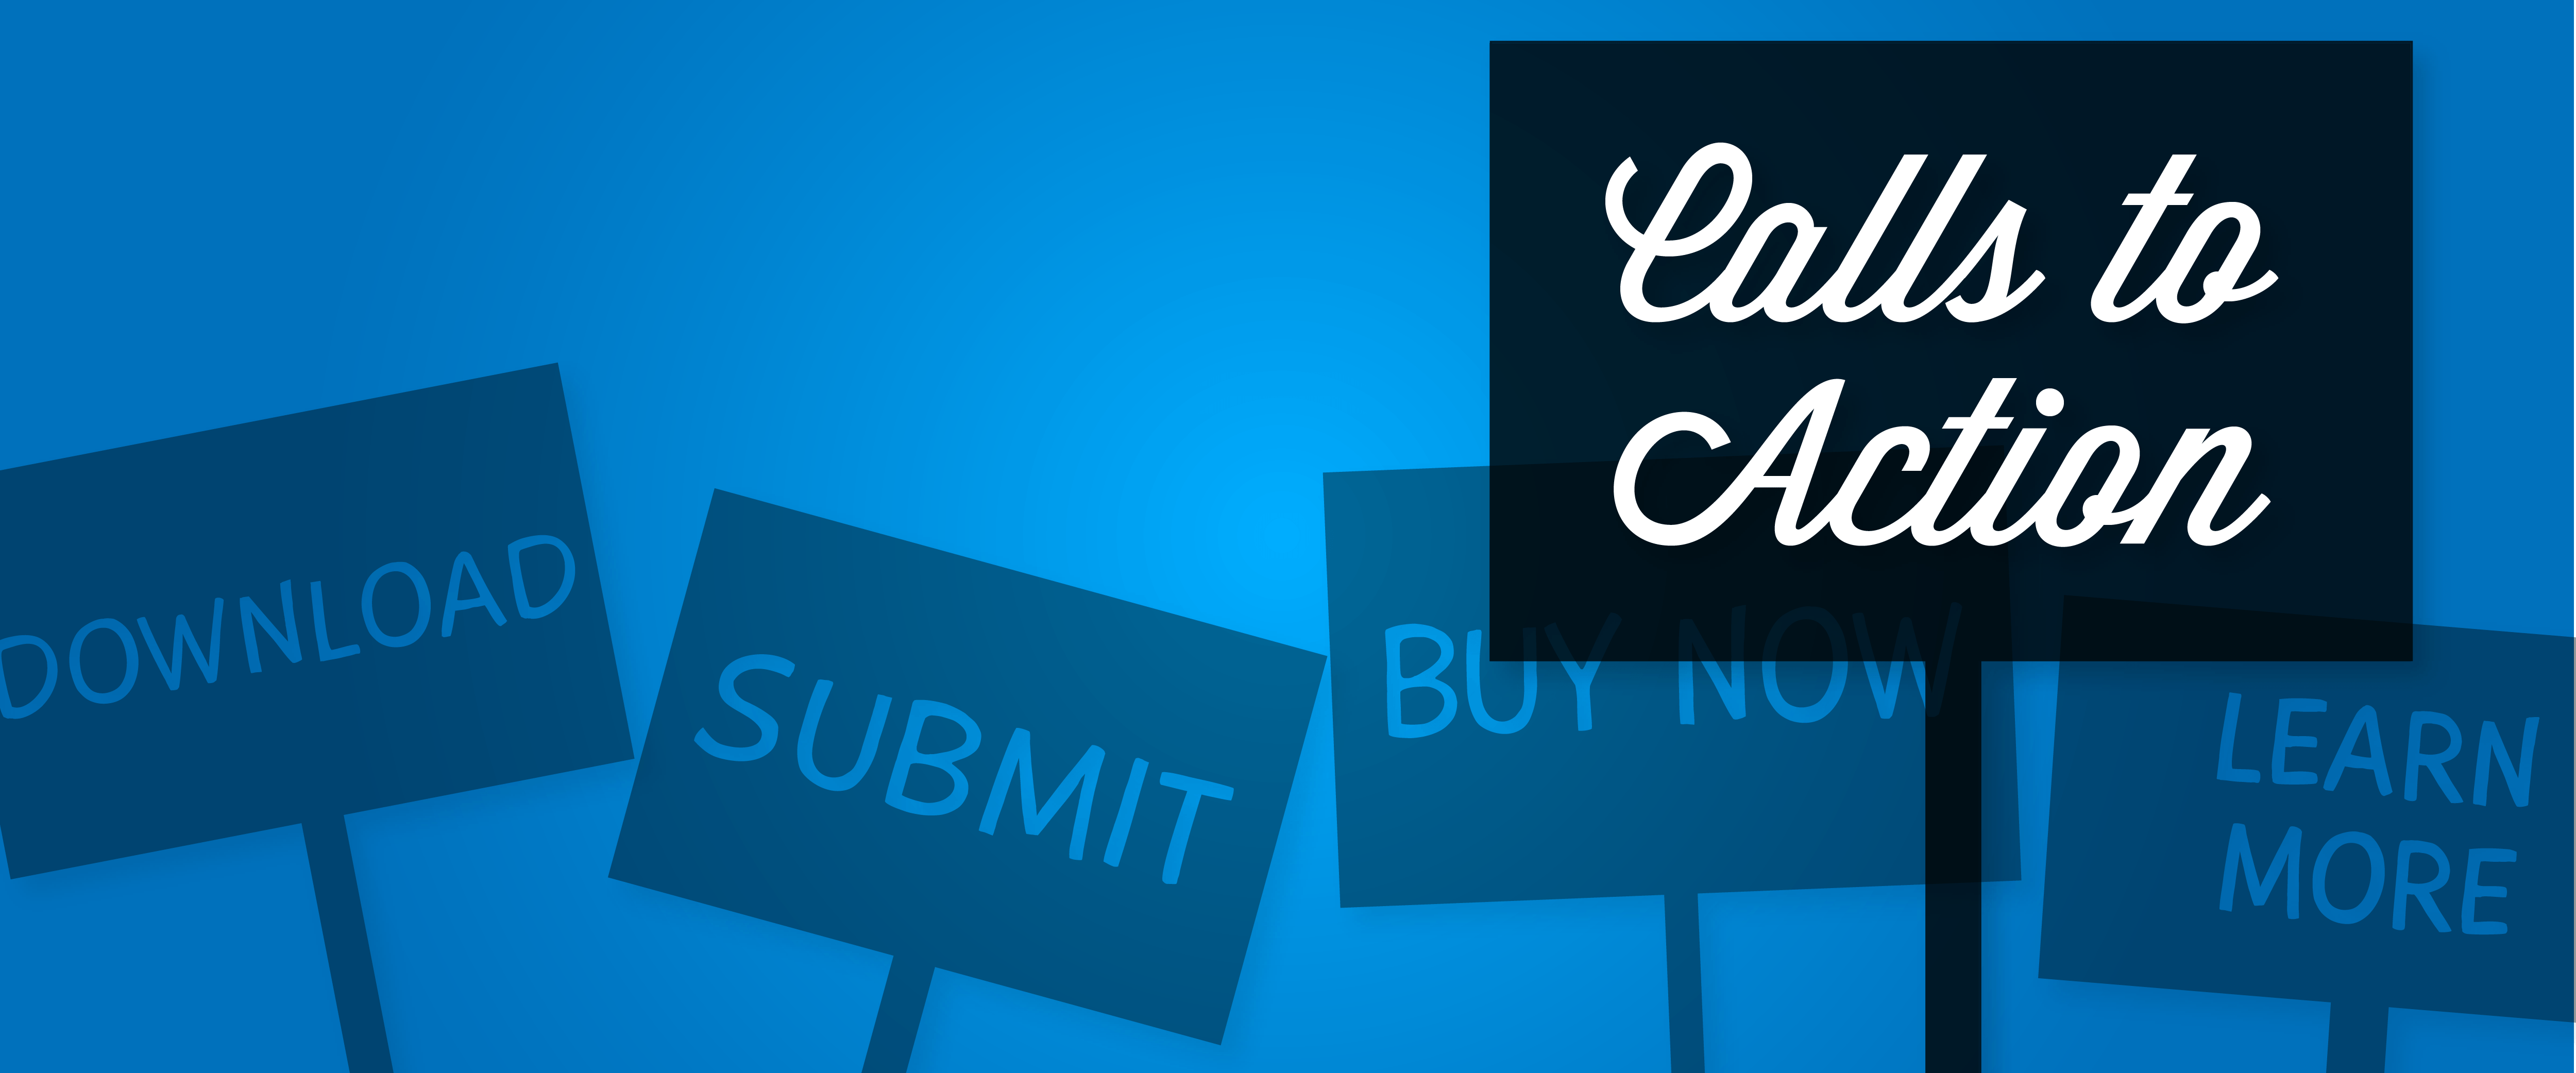 call-to-action-button